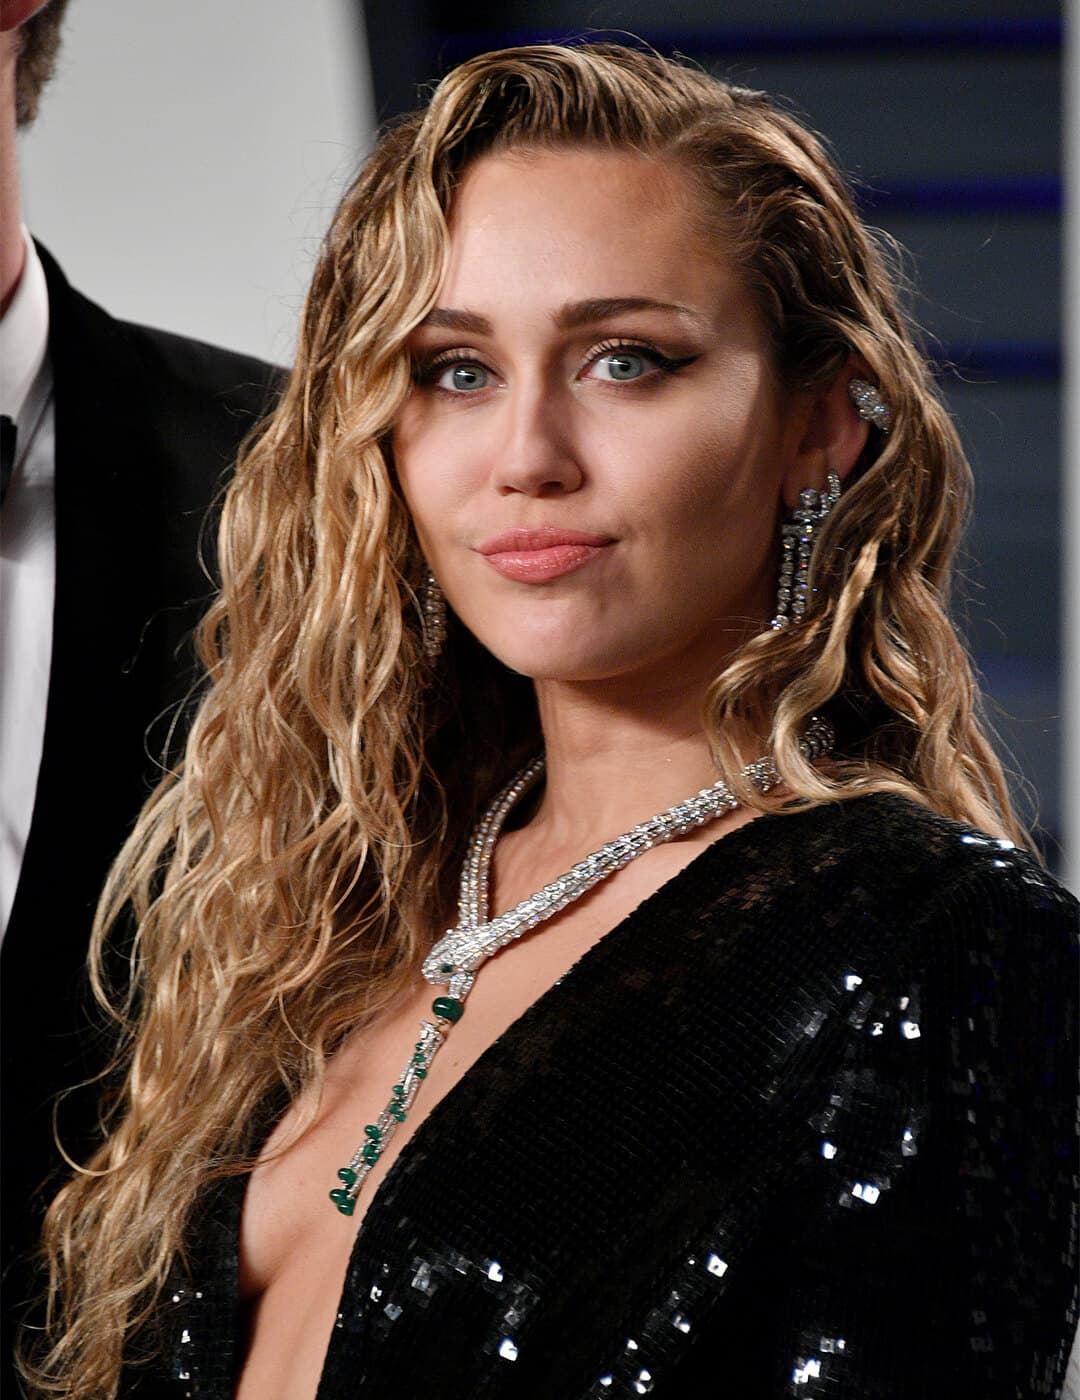 Miley Cyrus looking glam in a wet look curly hairstyle and black sequined dress